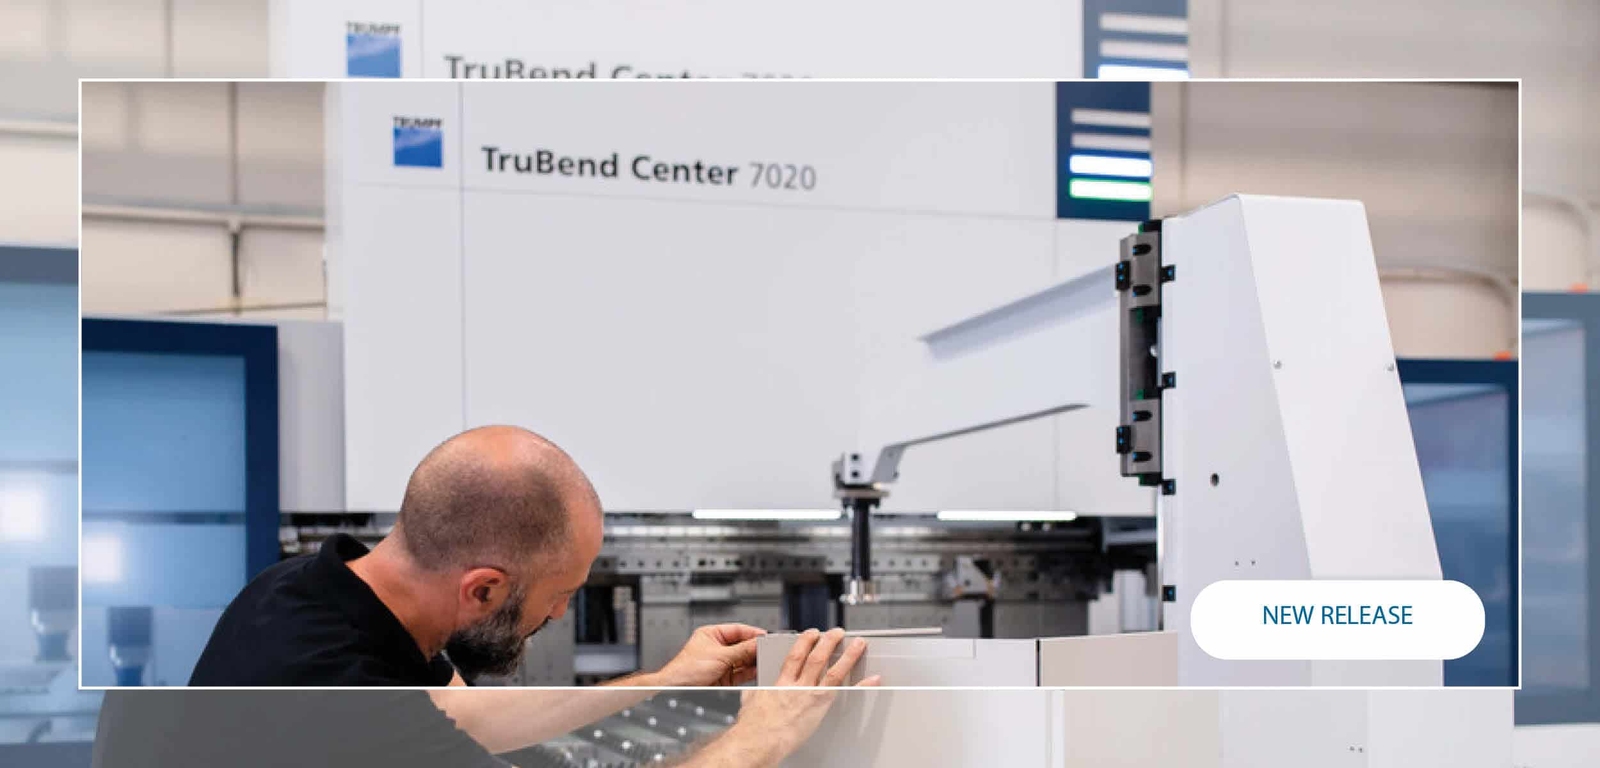 TRUMPF’s TruBend Center 7020 – The Fastest Bending Machine on the Market